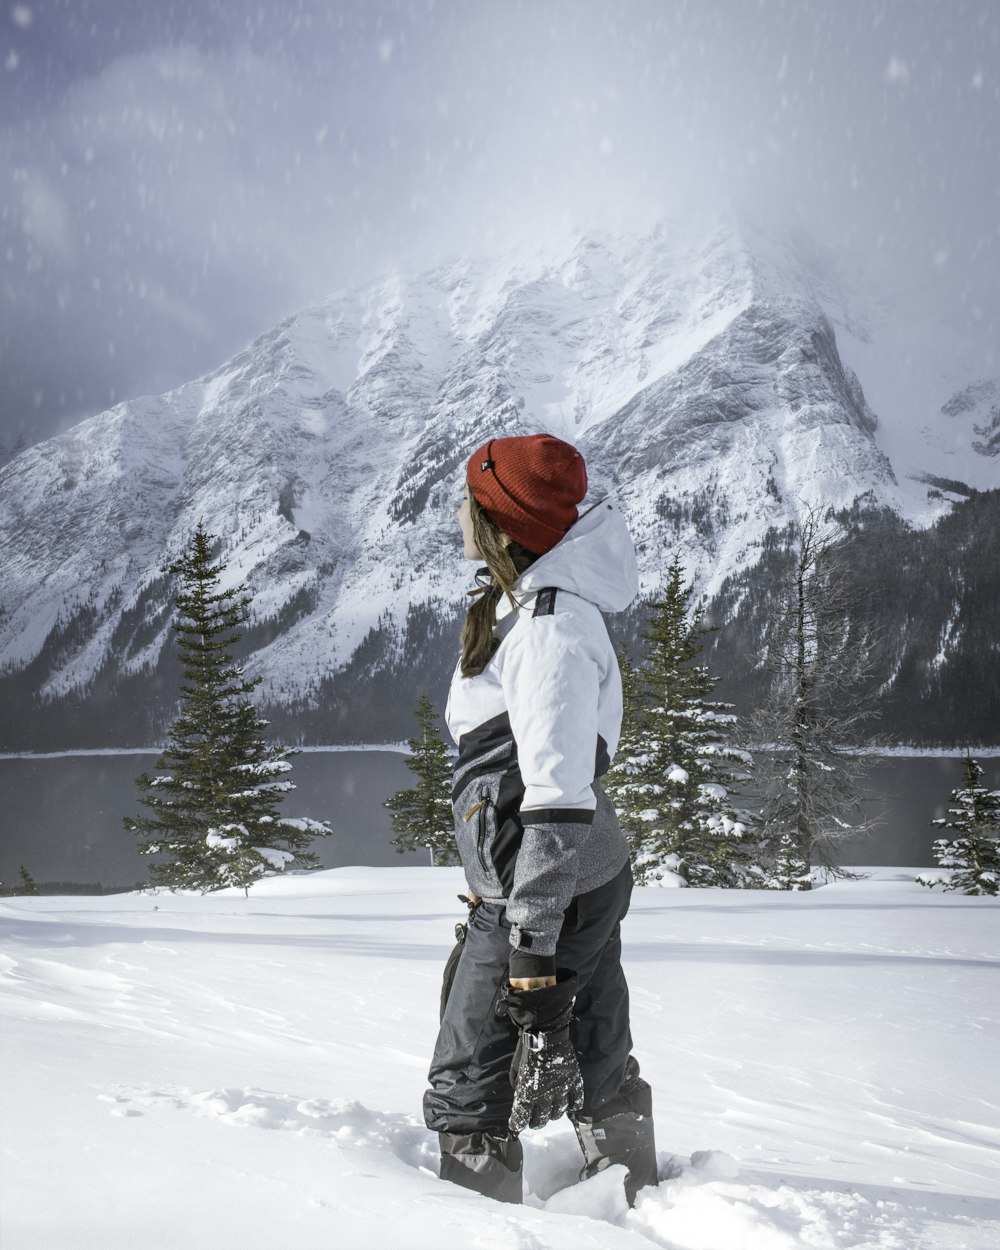 woman in white jacket and red knit cap standing on snow covered ground